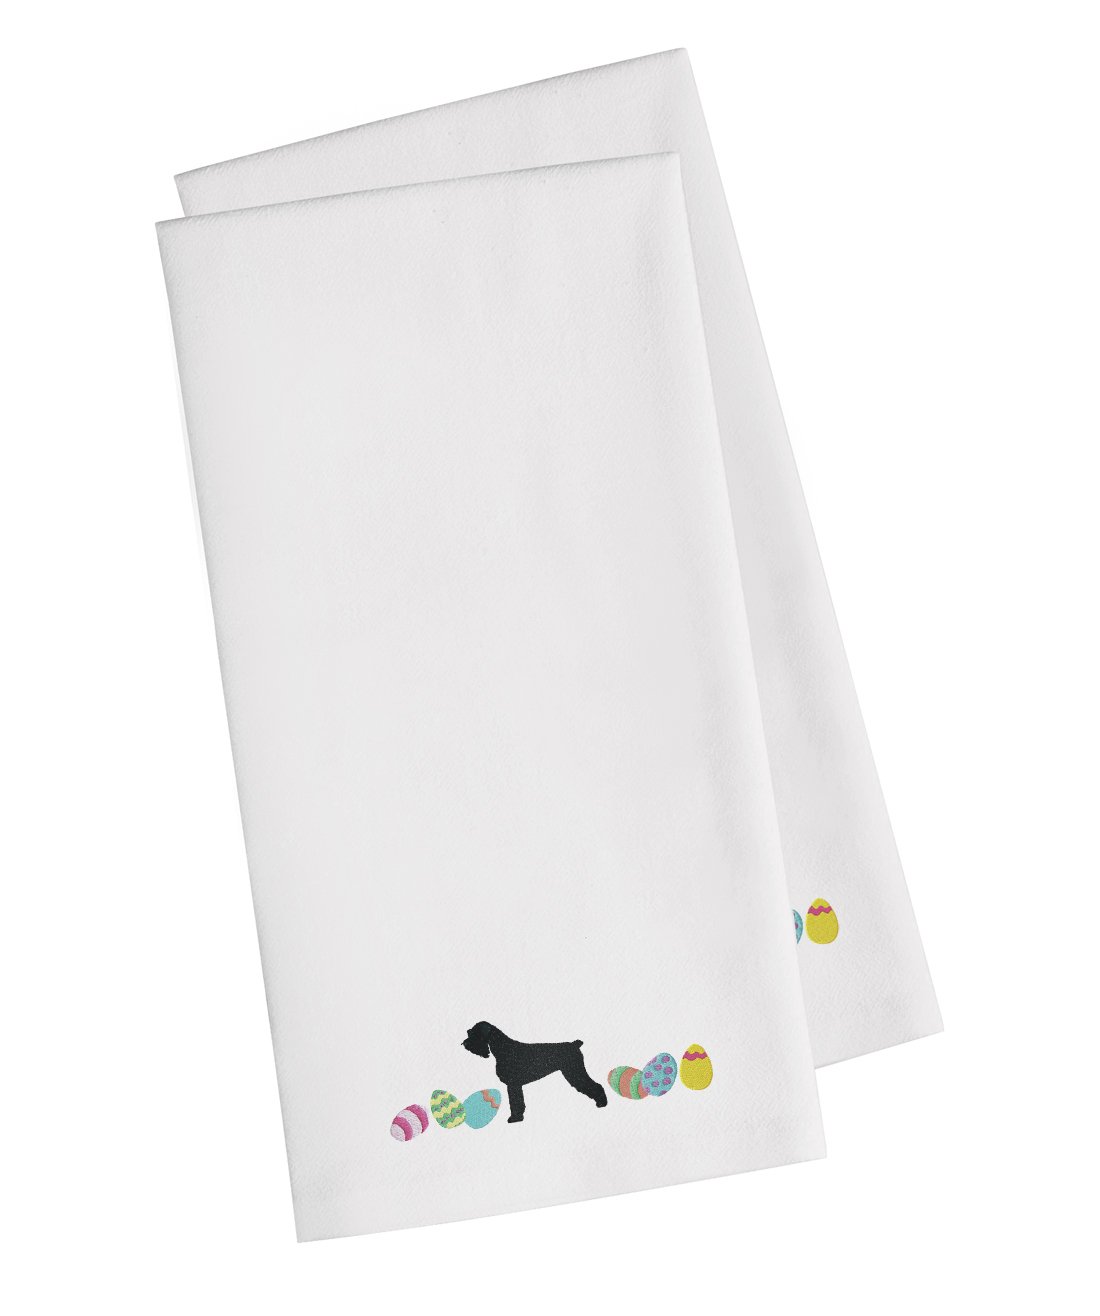 Giant Schnauzer Easter White Embroidered Kitchen Towel Set of 2 CK1646WHTWE by Caroline's Treasures